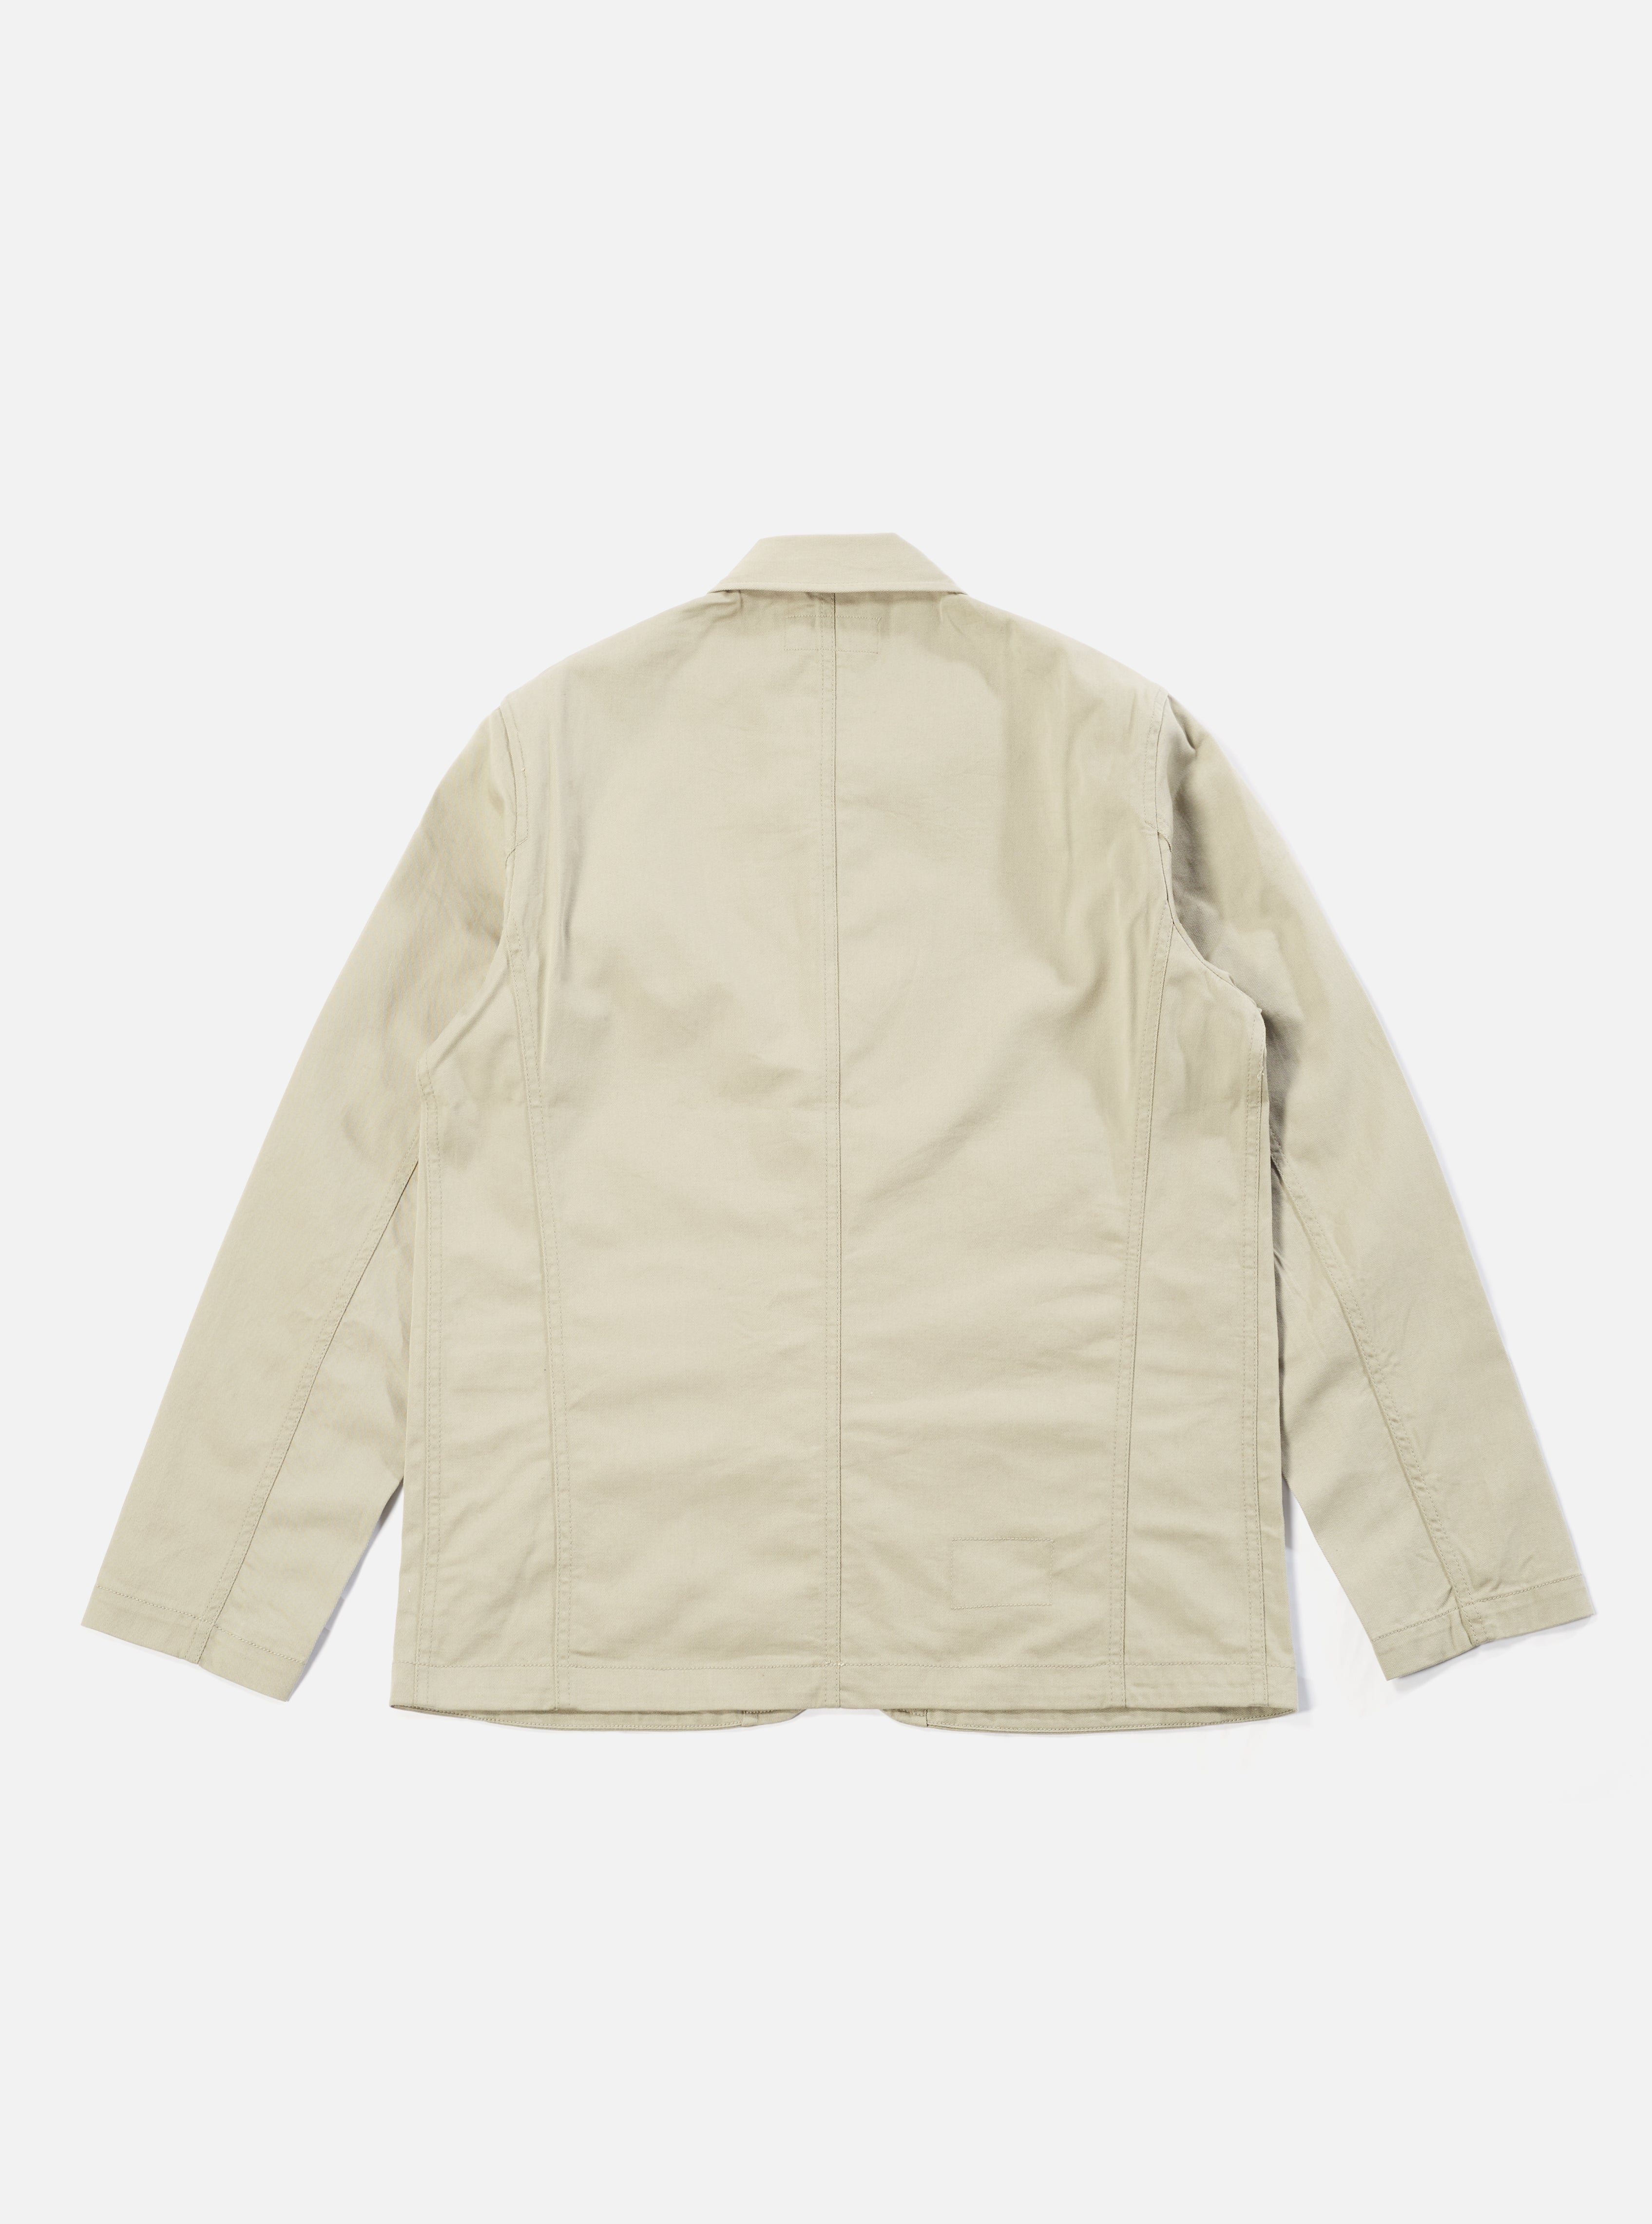 Universal Works Bakers Jacket in Stone Twill